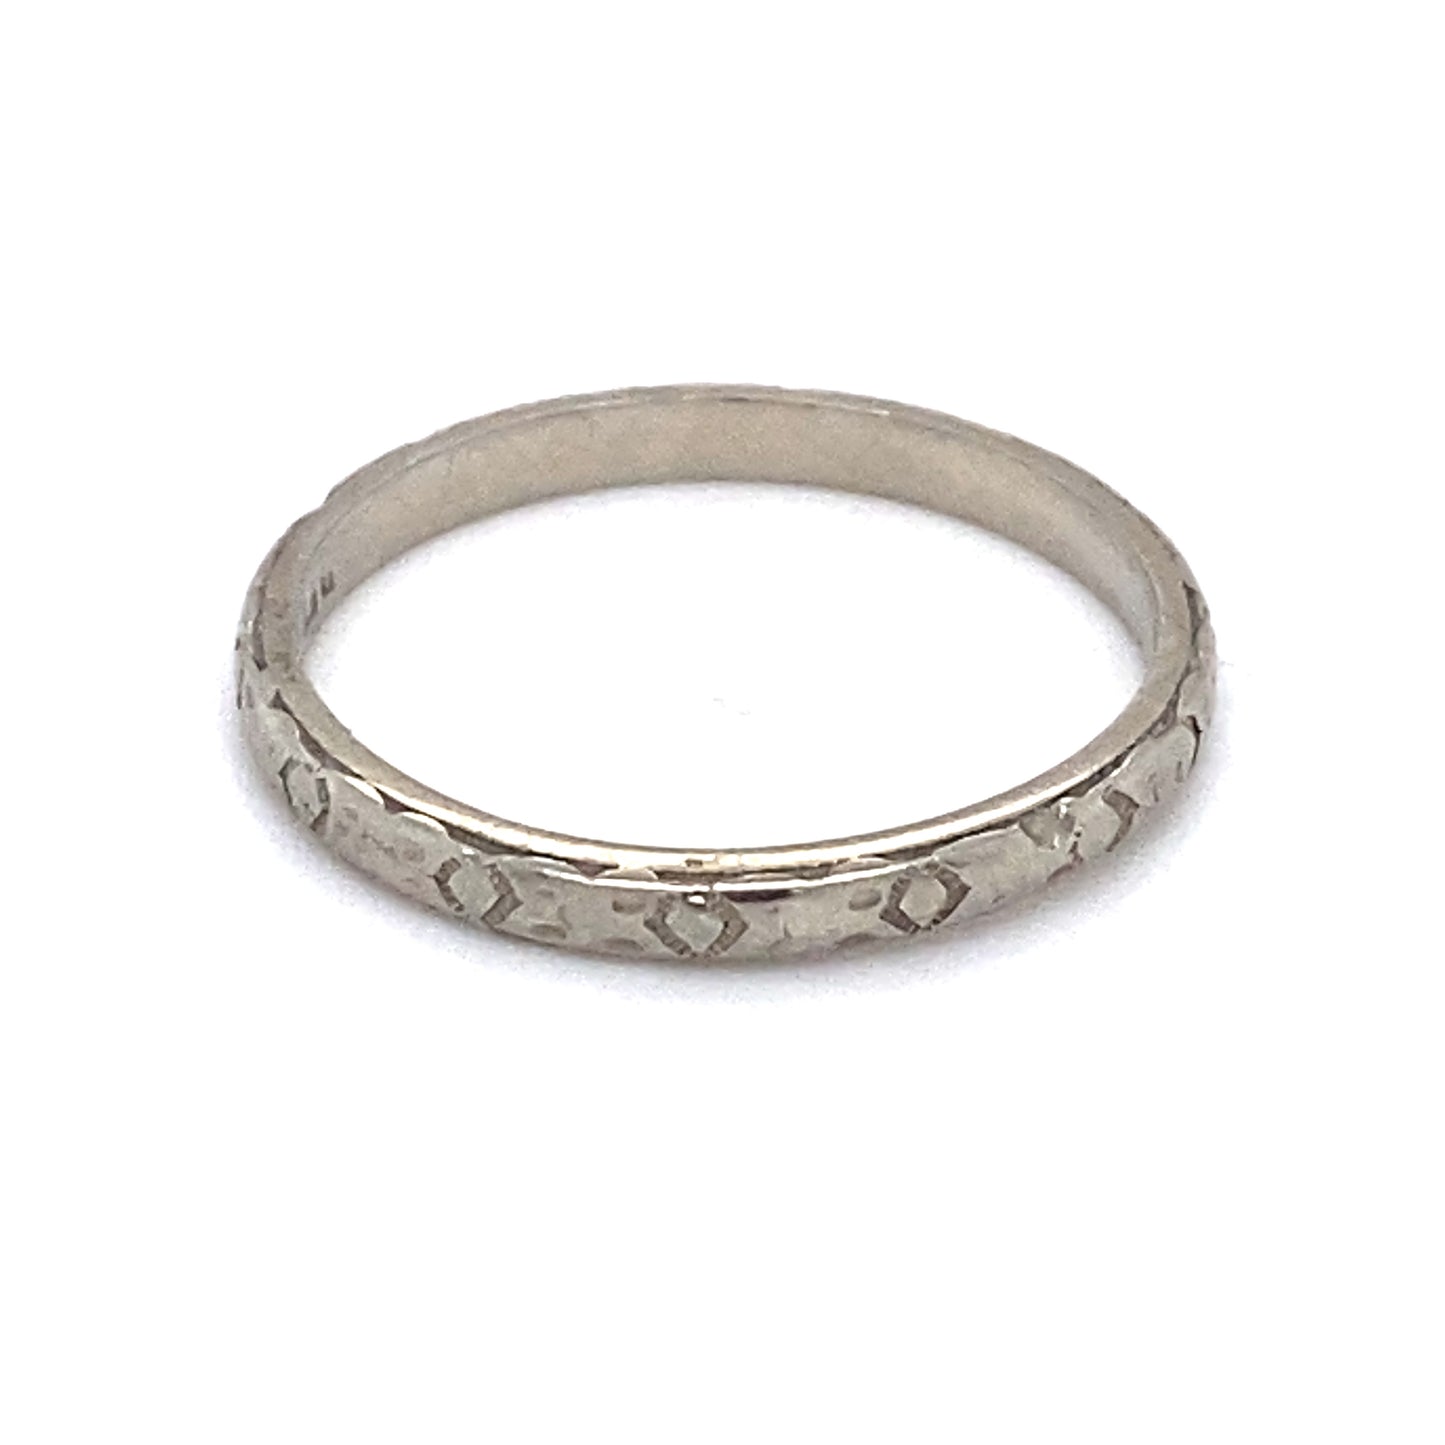 Circa 1920s Belais Art Deco Etched Wedding Band in 18K White Gold